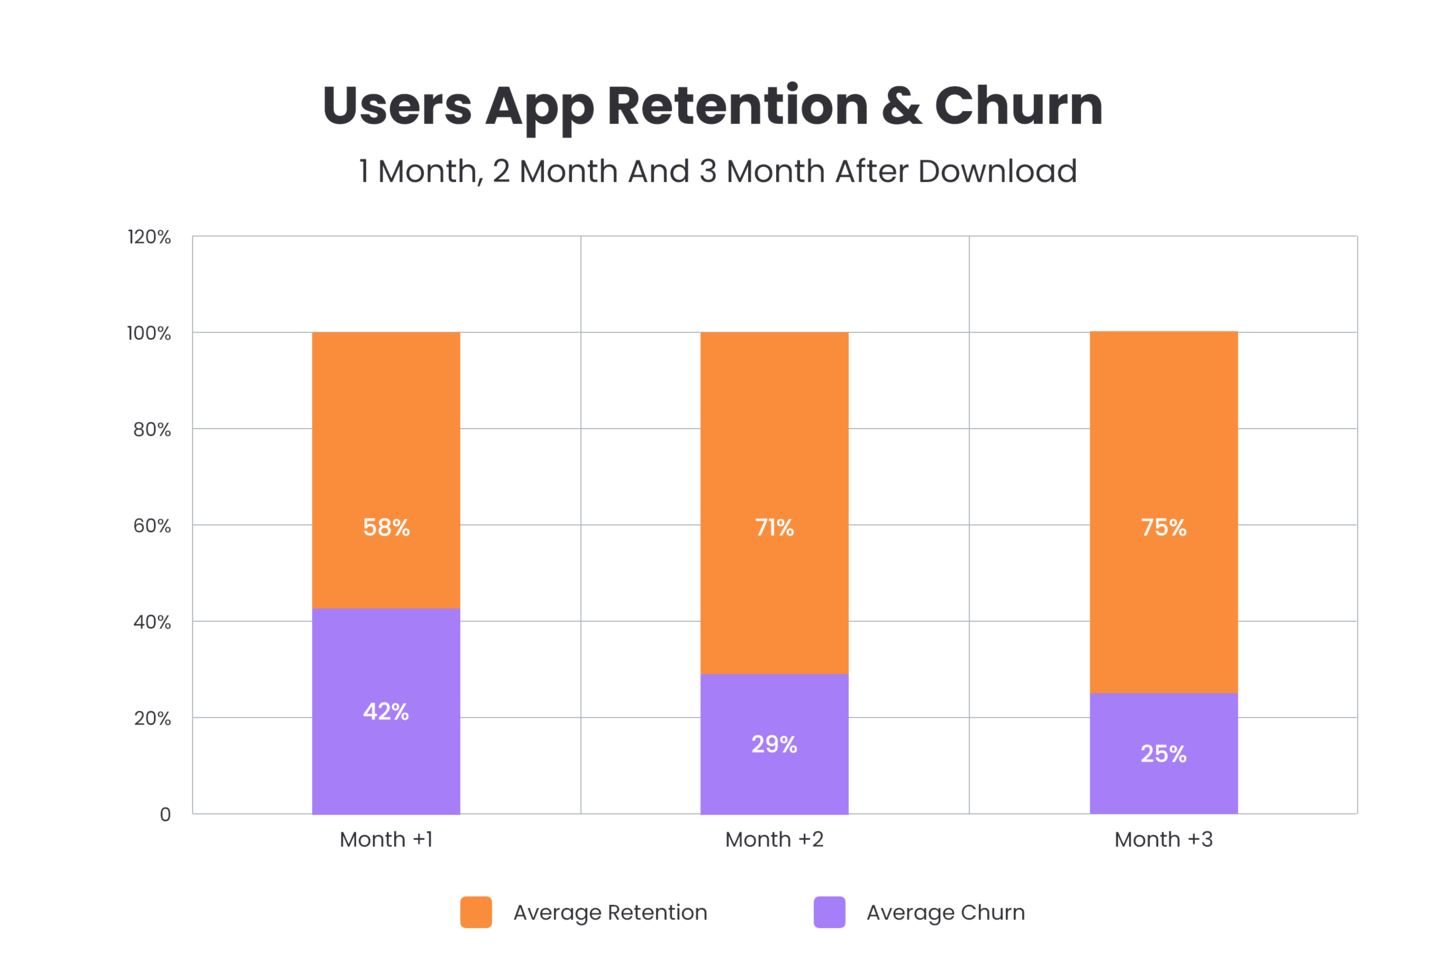 Mobile Apps Retention and Churn Rate